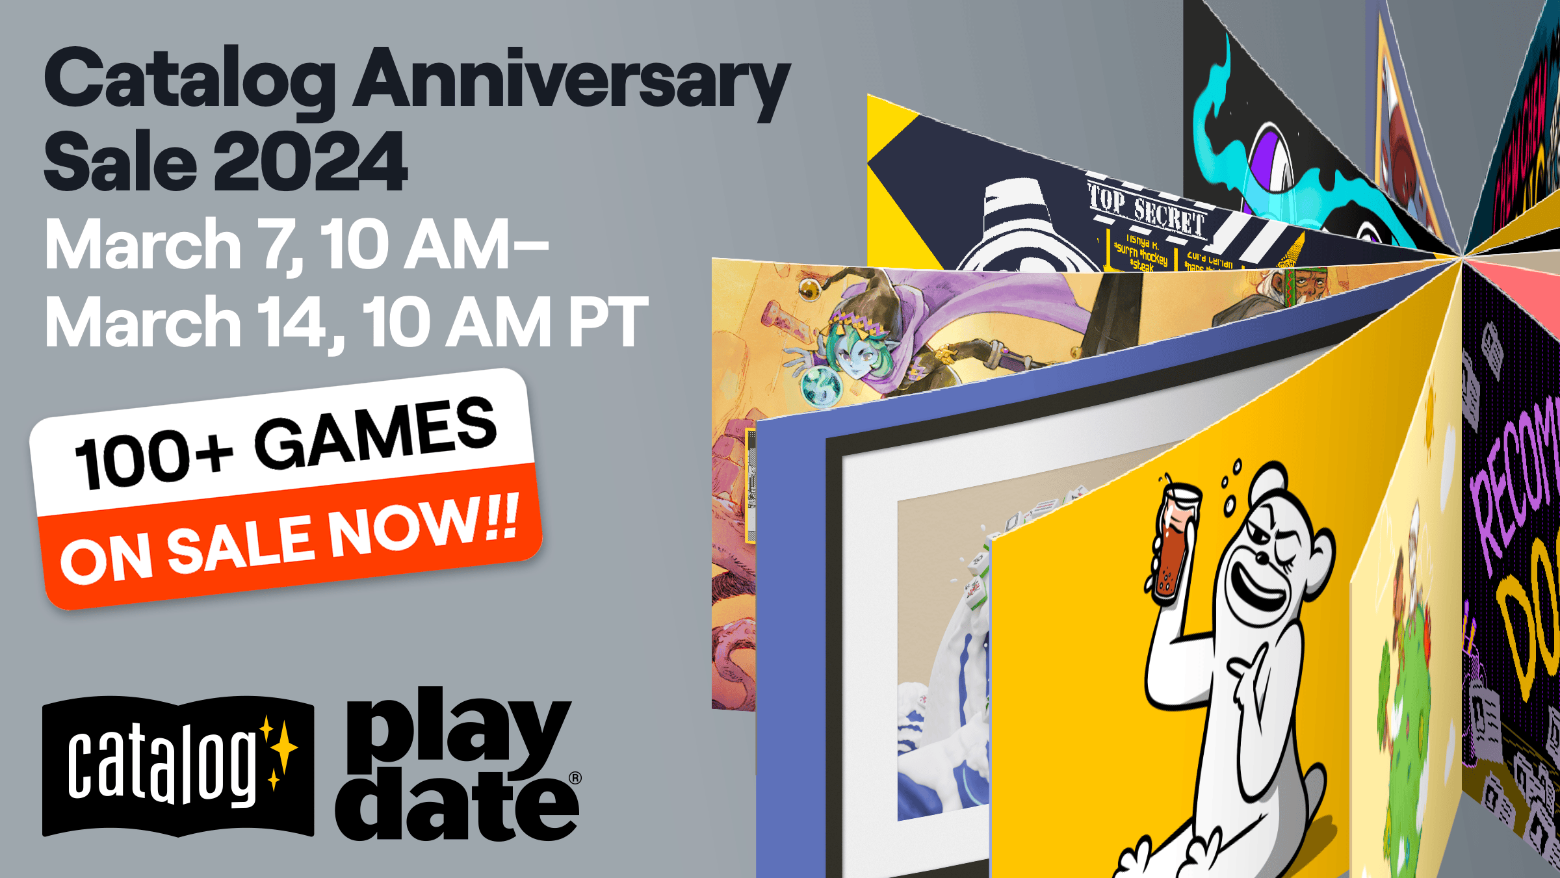 Illustration of a carousel made from Playdate game art. Text: Catalog Anniversary Sale 2024, March 7, 10 AM–March 14, 10 AM PT. 100+ games on sale.